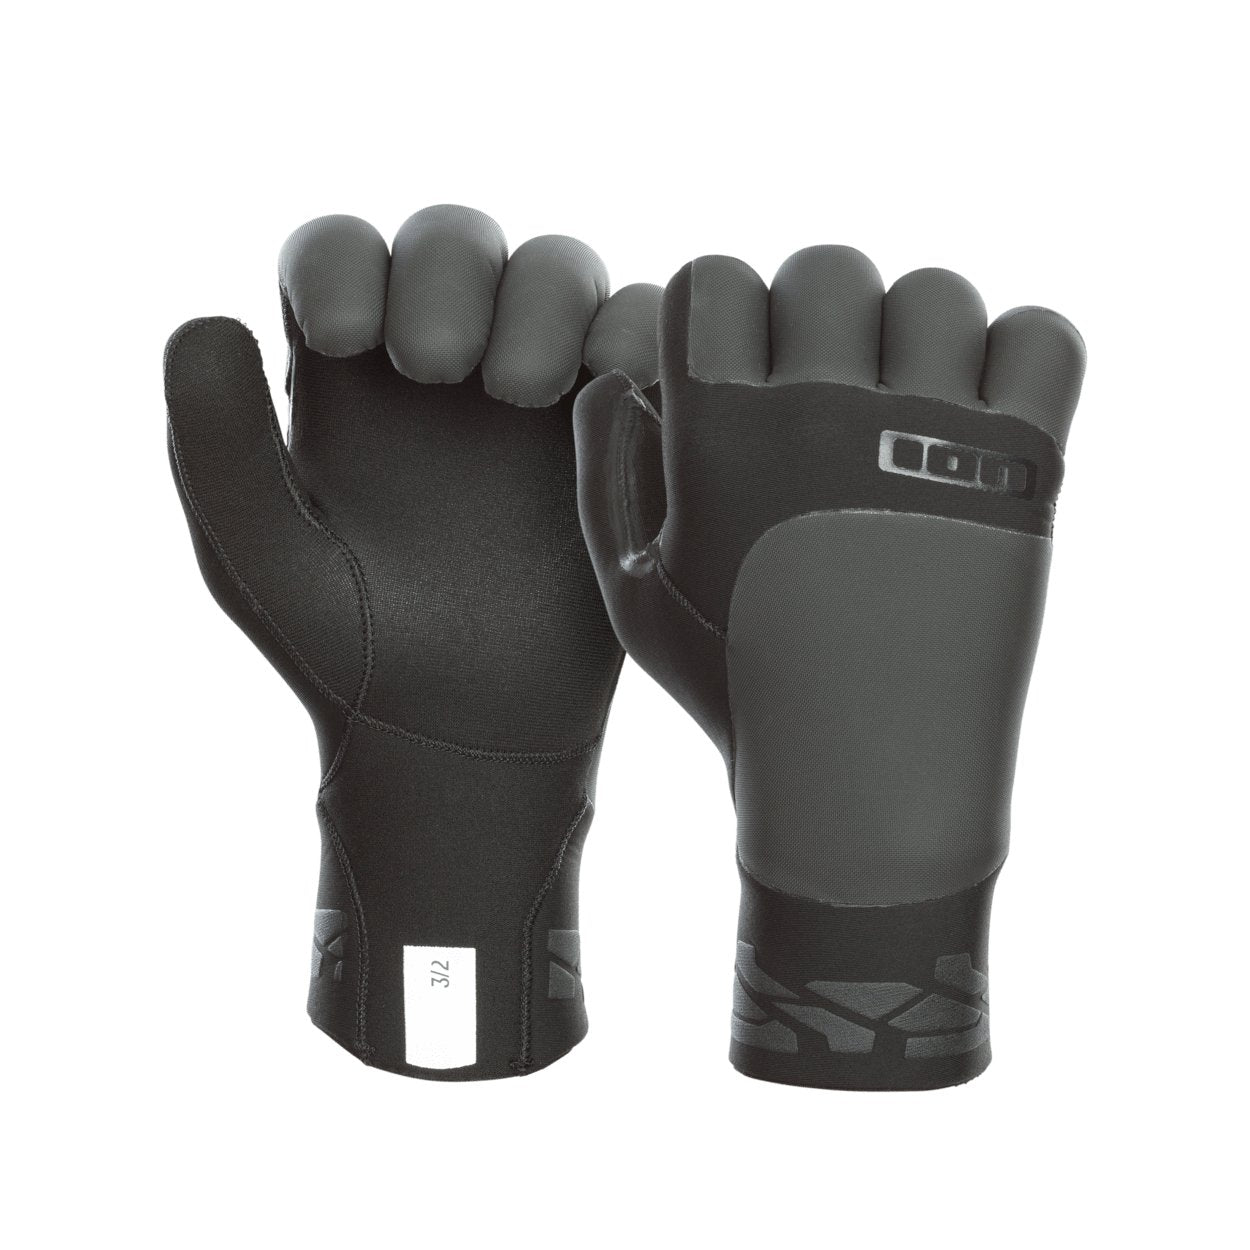 ION Claw Gloves 3/2 2022 - Worthing Watersports - 9008415883066 - Neo Accessories - ION Water